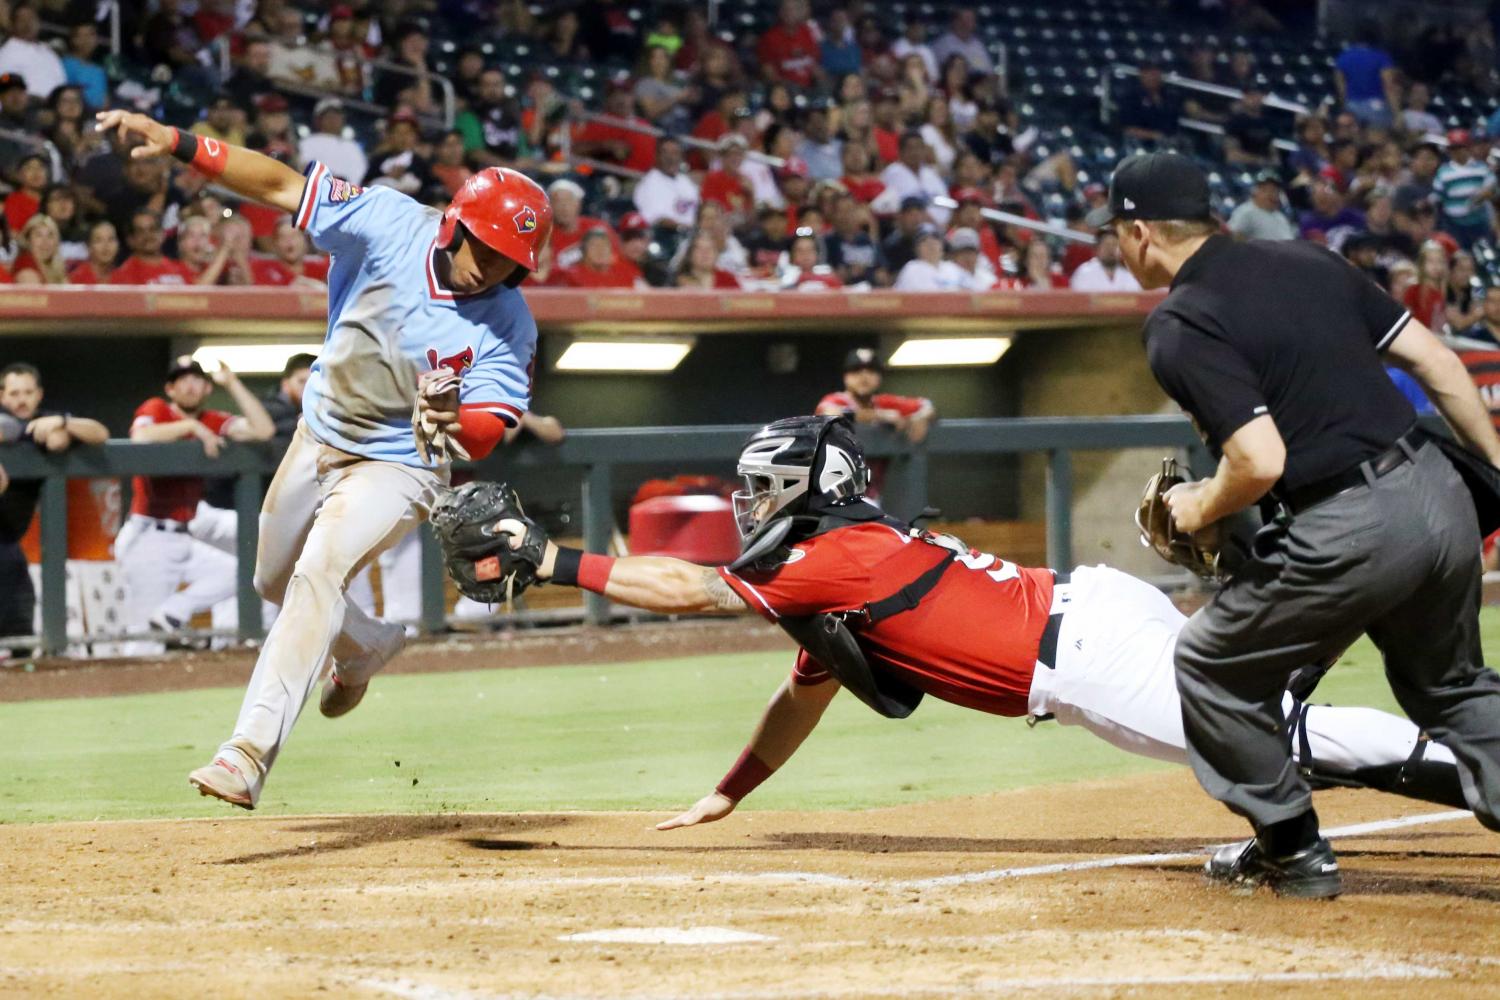 The Memphis Redbirds defeated the Chihuahuas winning the PCL Championship on September 18.